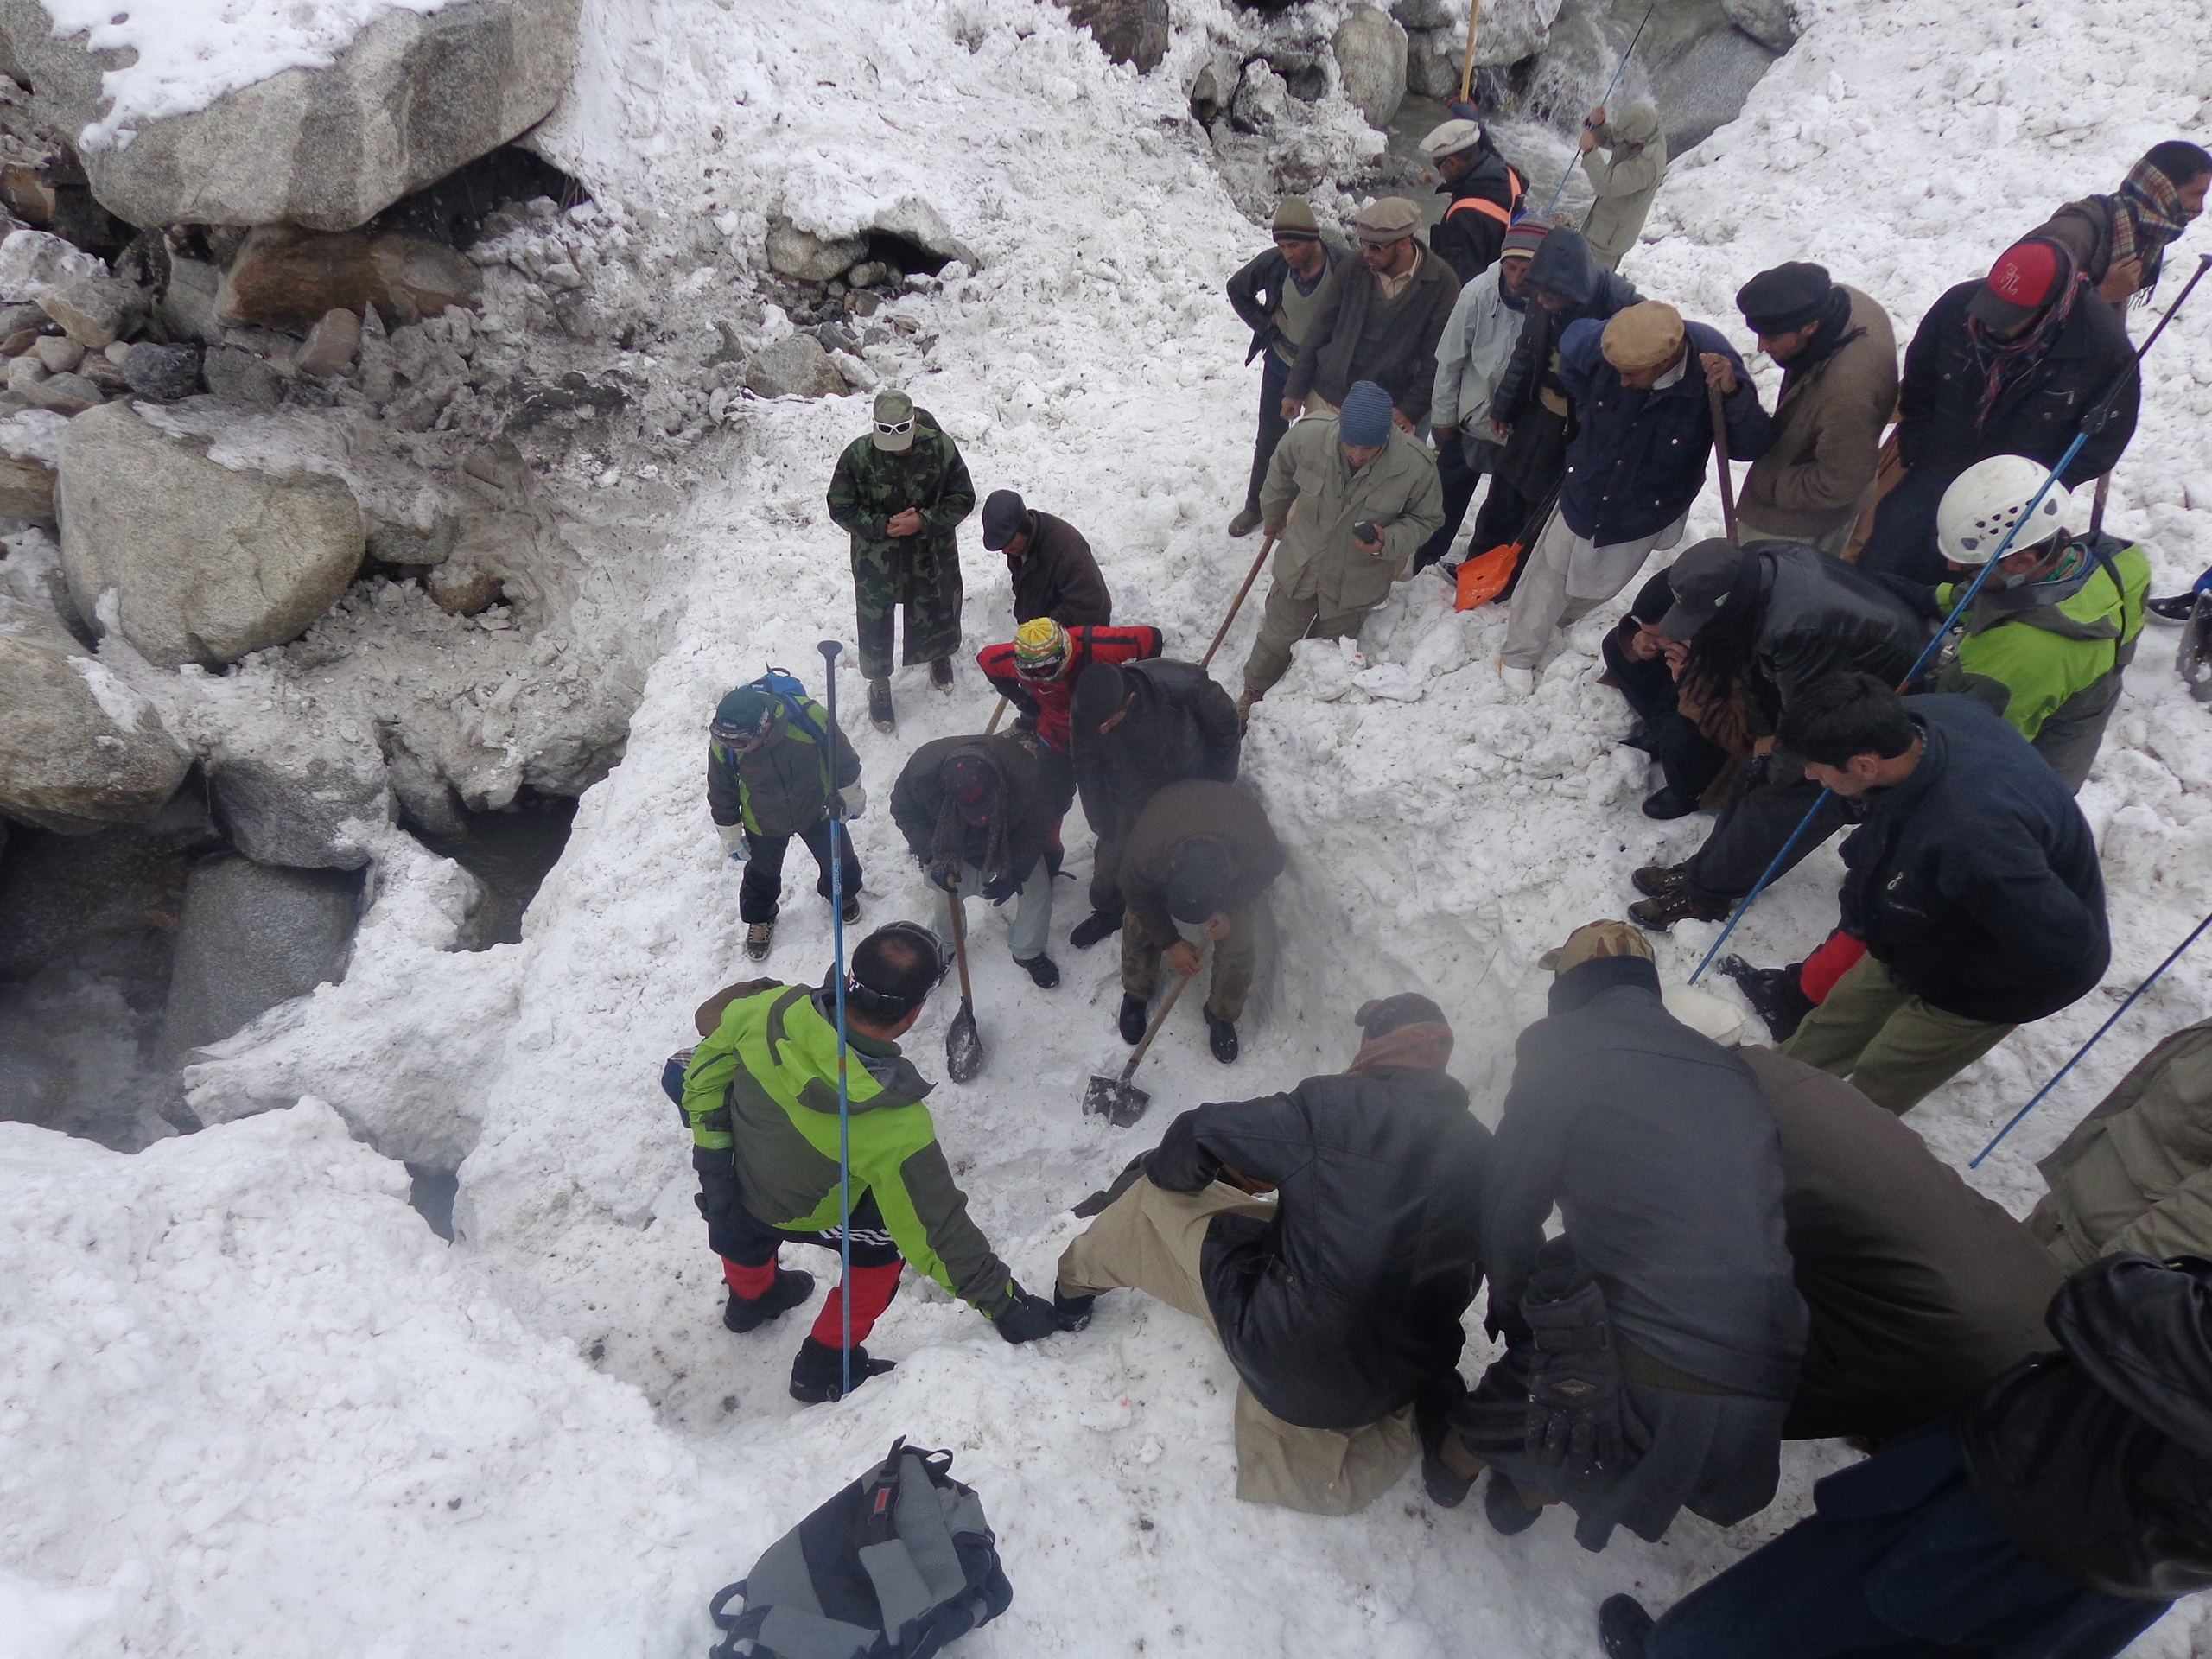 Rescuers working after the Susoom avalanche